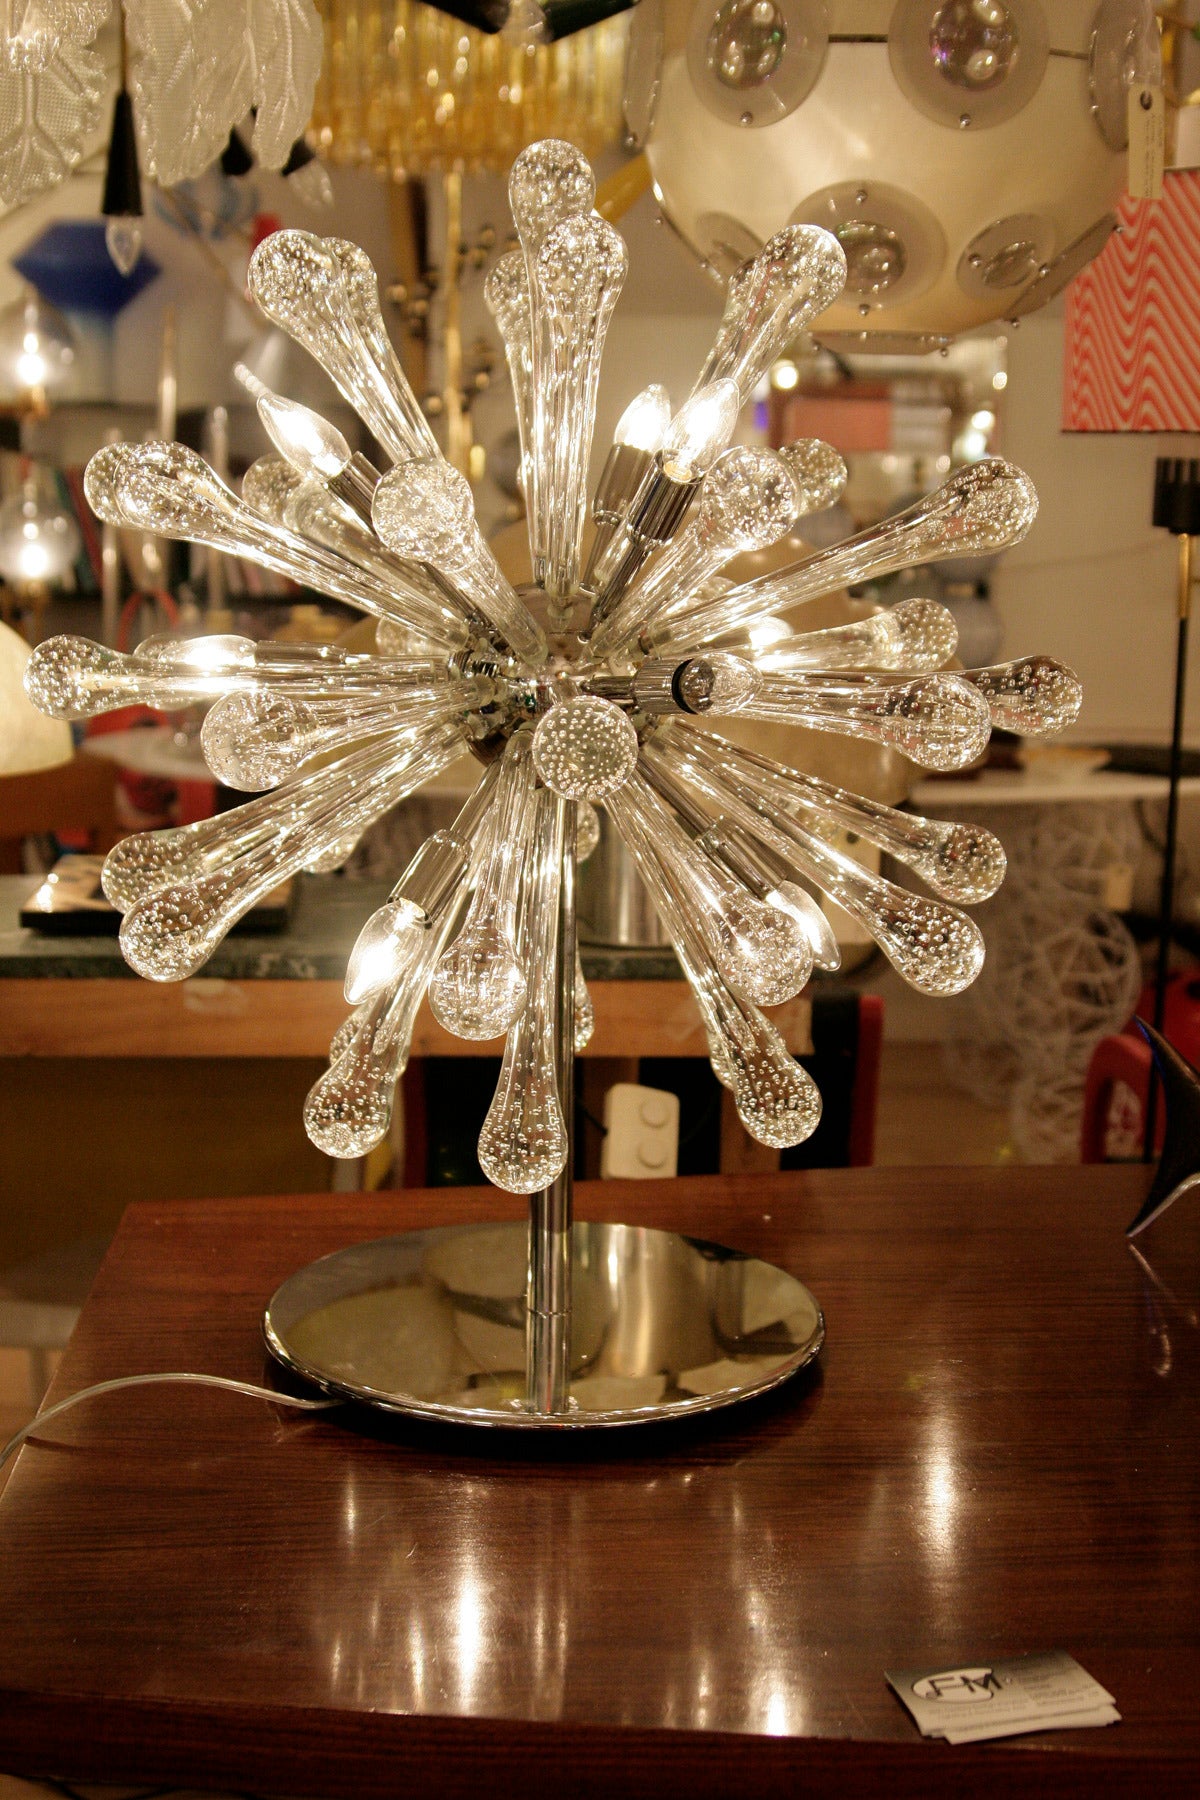 handblown glass components on chrome steel structure. Made in Italy, Murano
ten lights
40 Watts max.